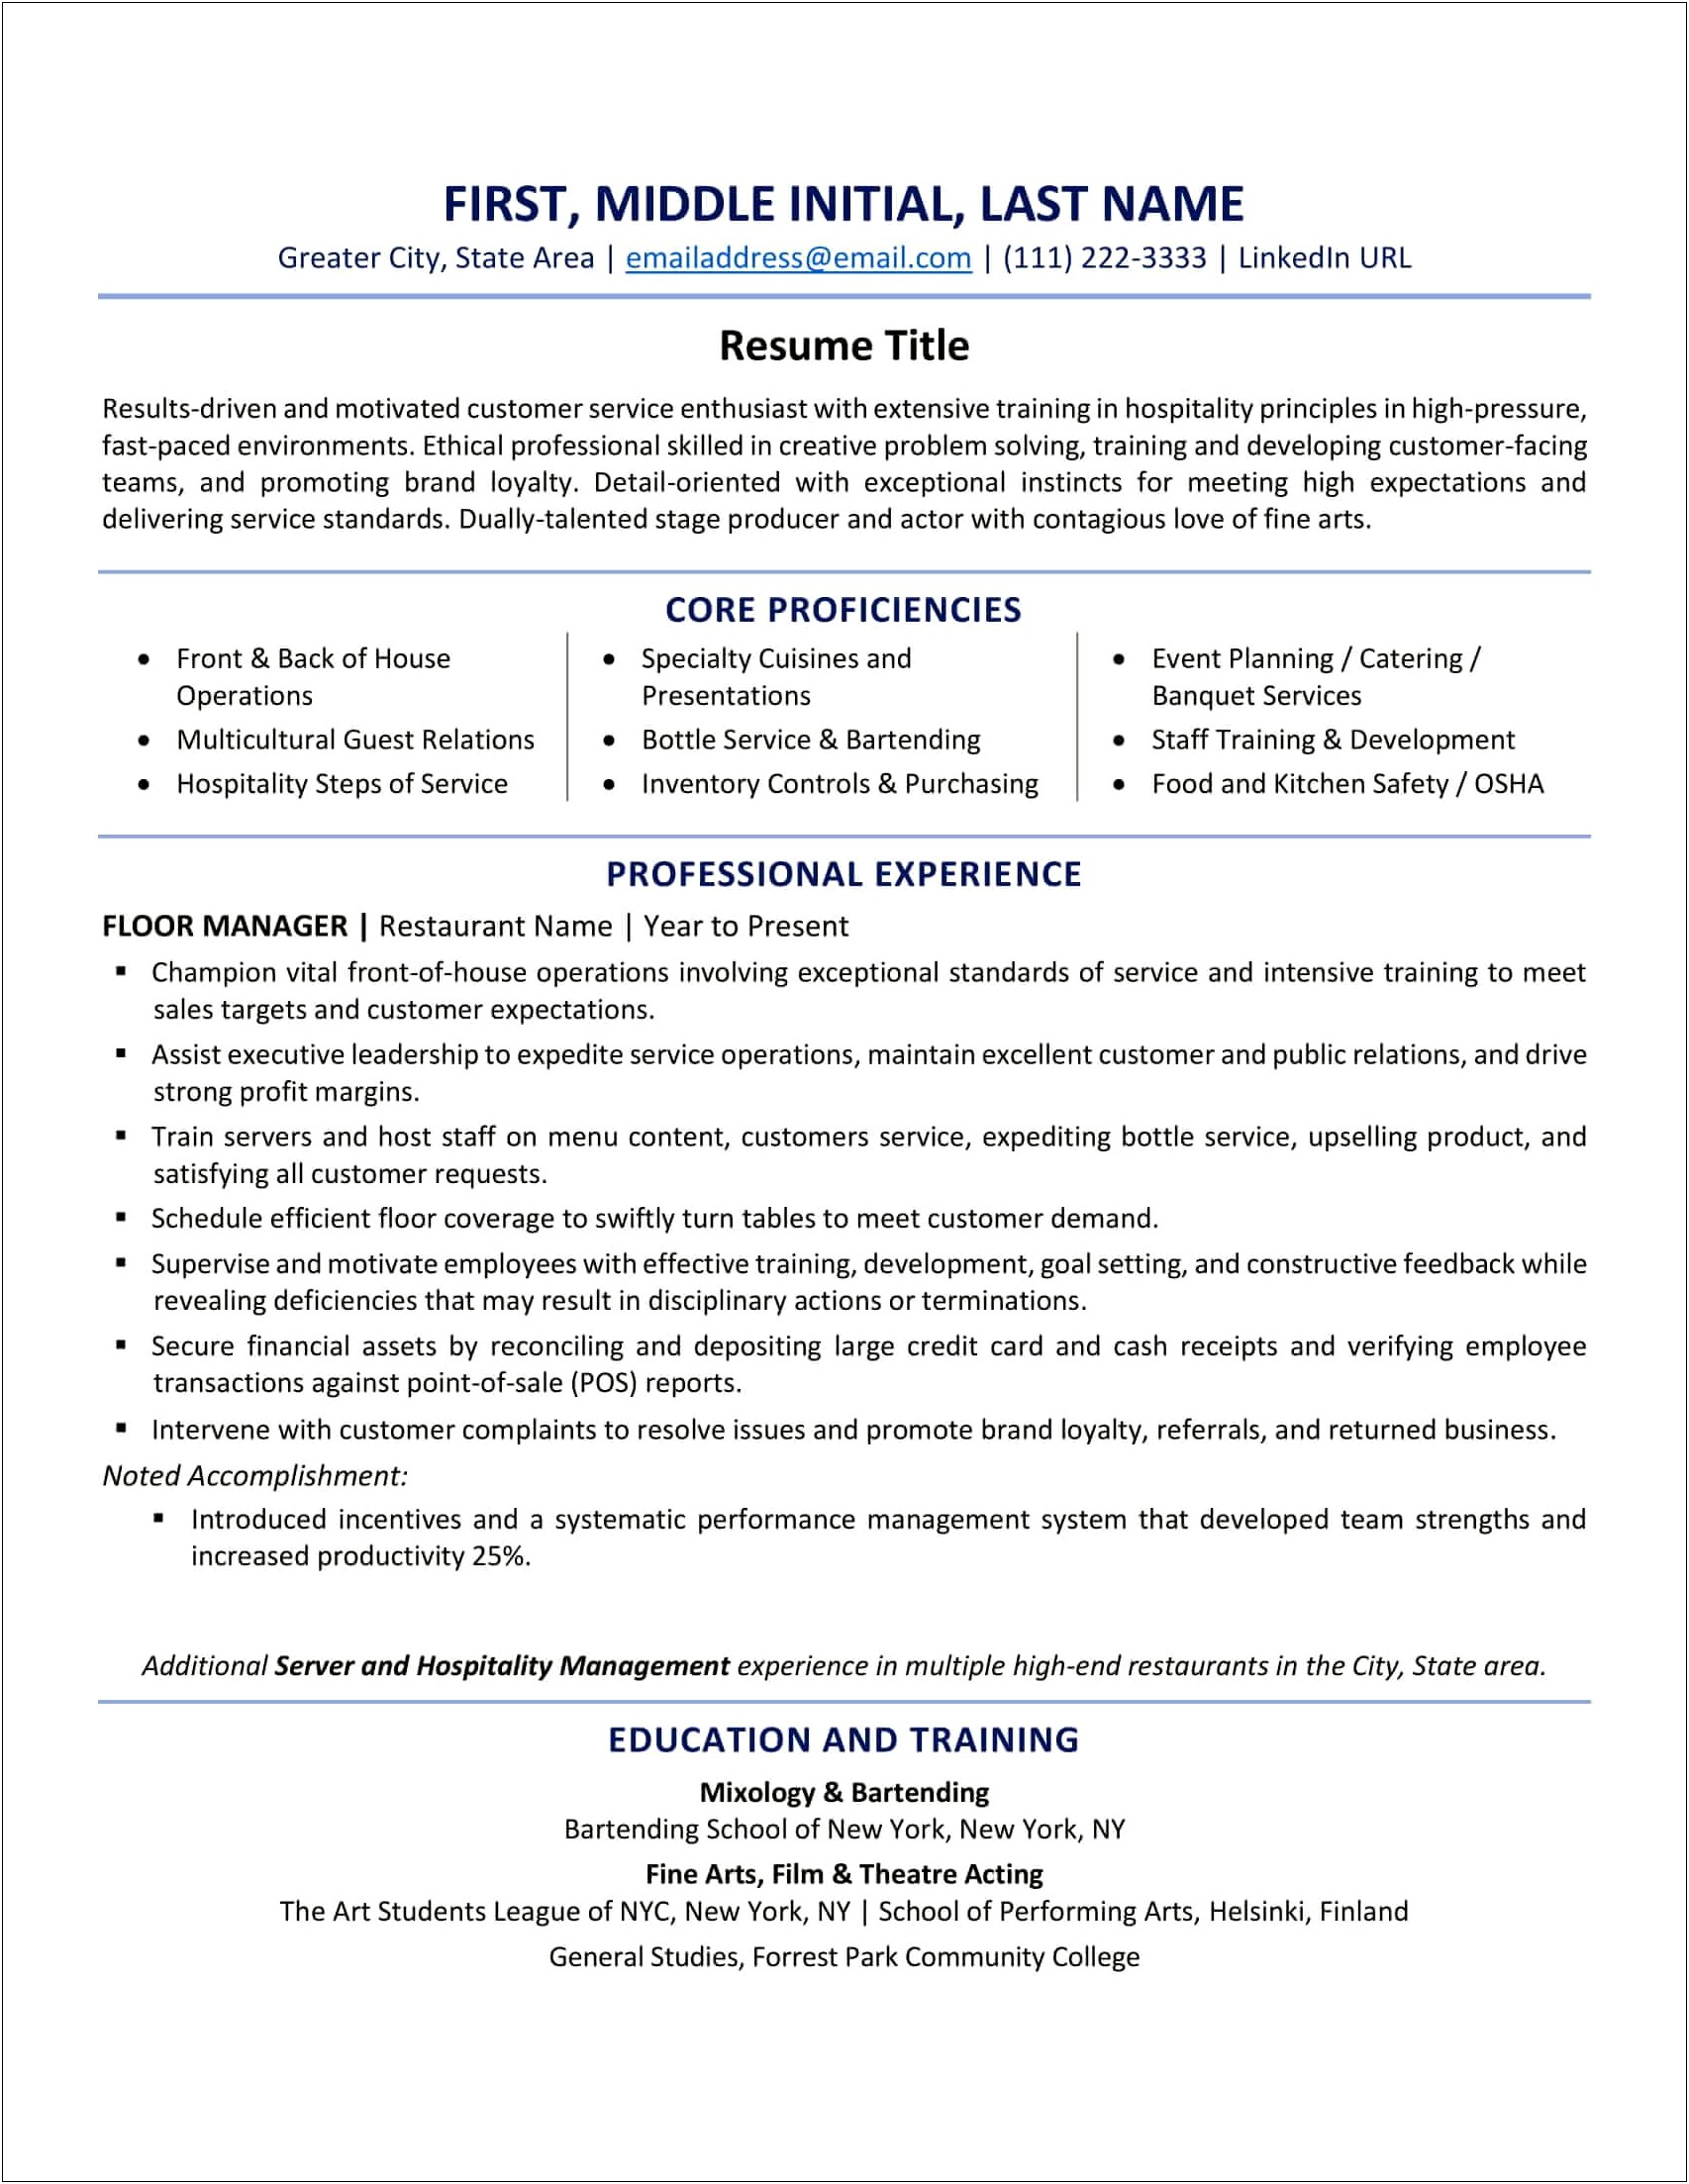 Best Resume Fro Lng Term Unemployed